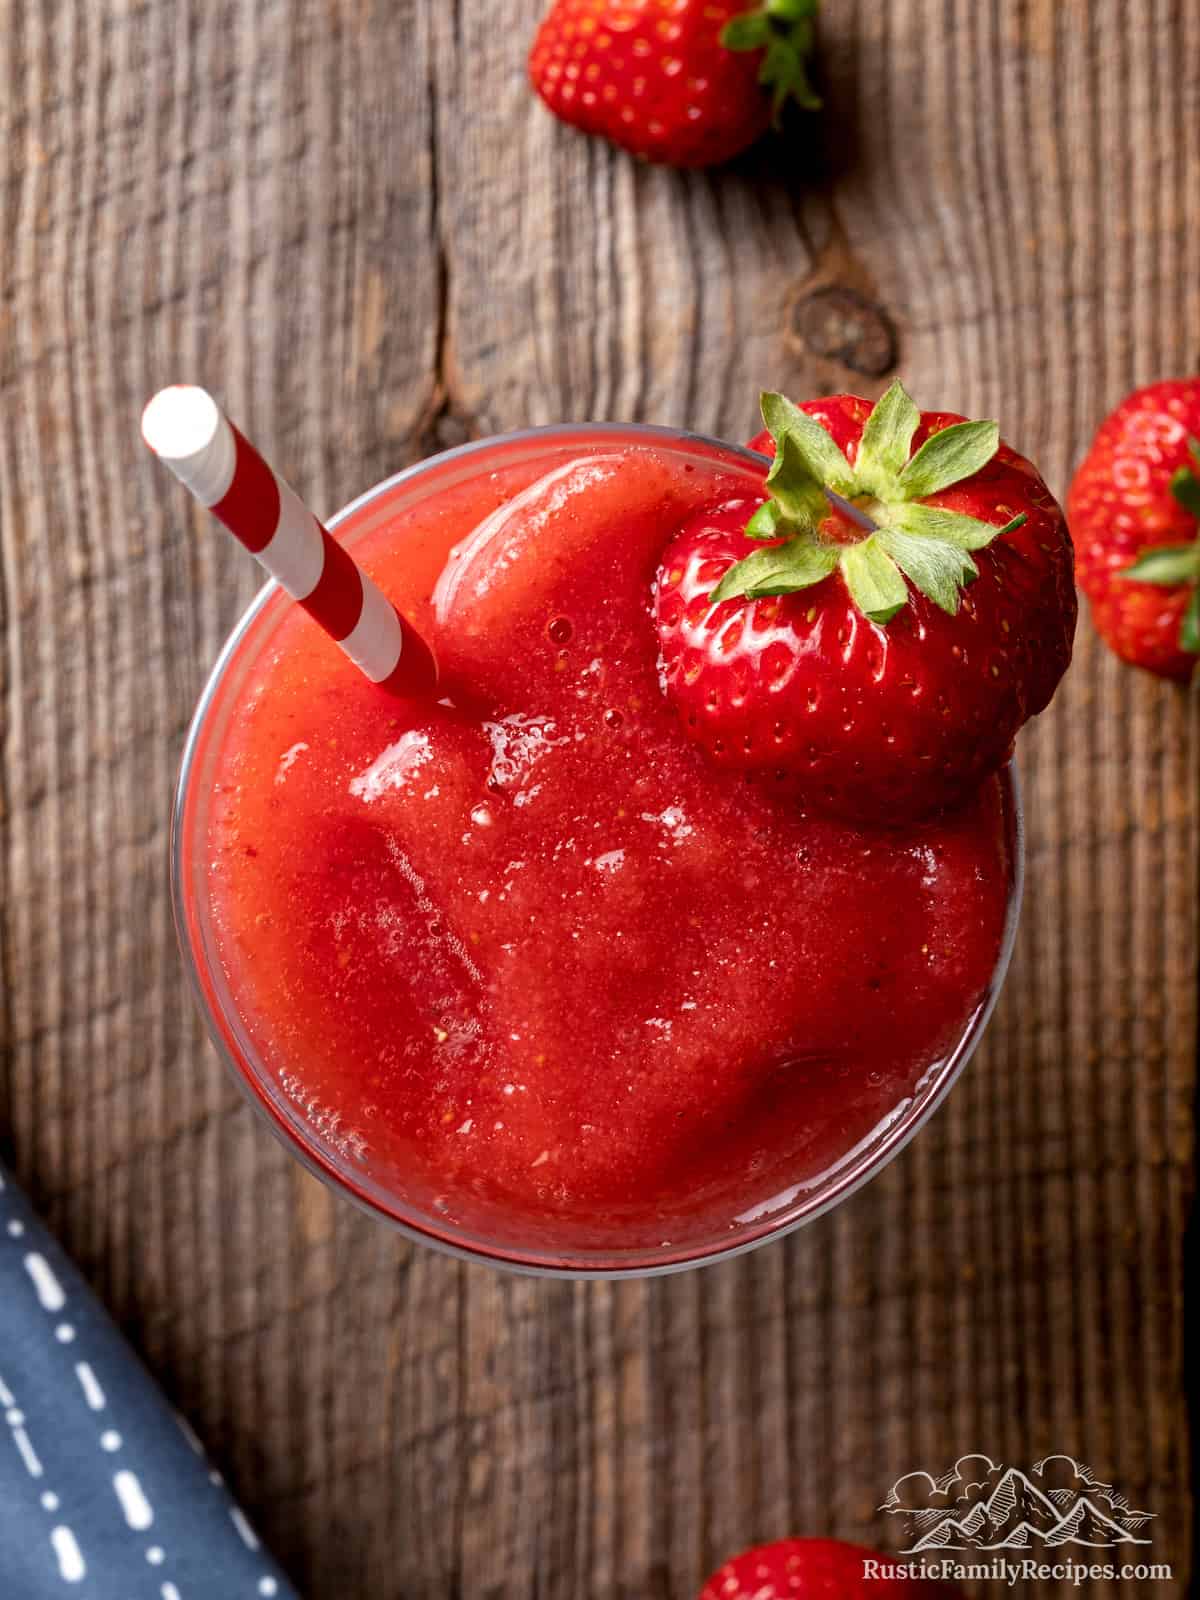 Top view of a Strawberry Daiquiri with a fresh berry and straw